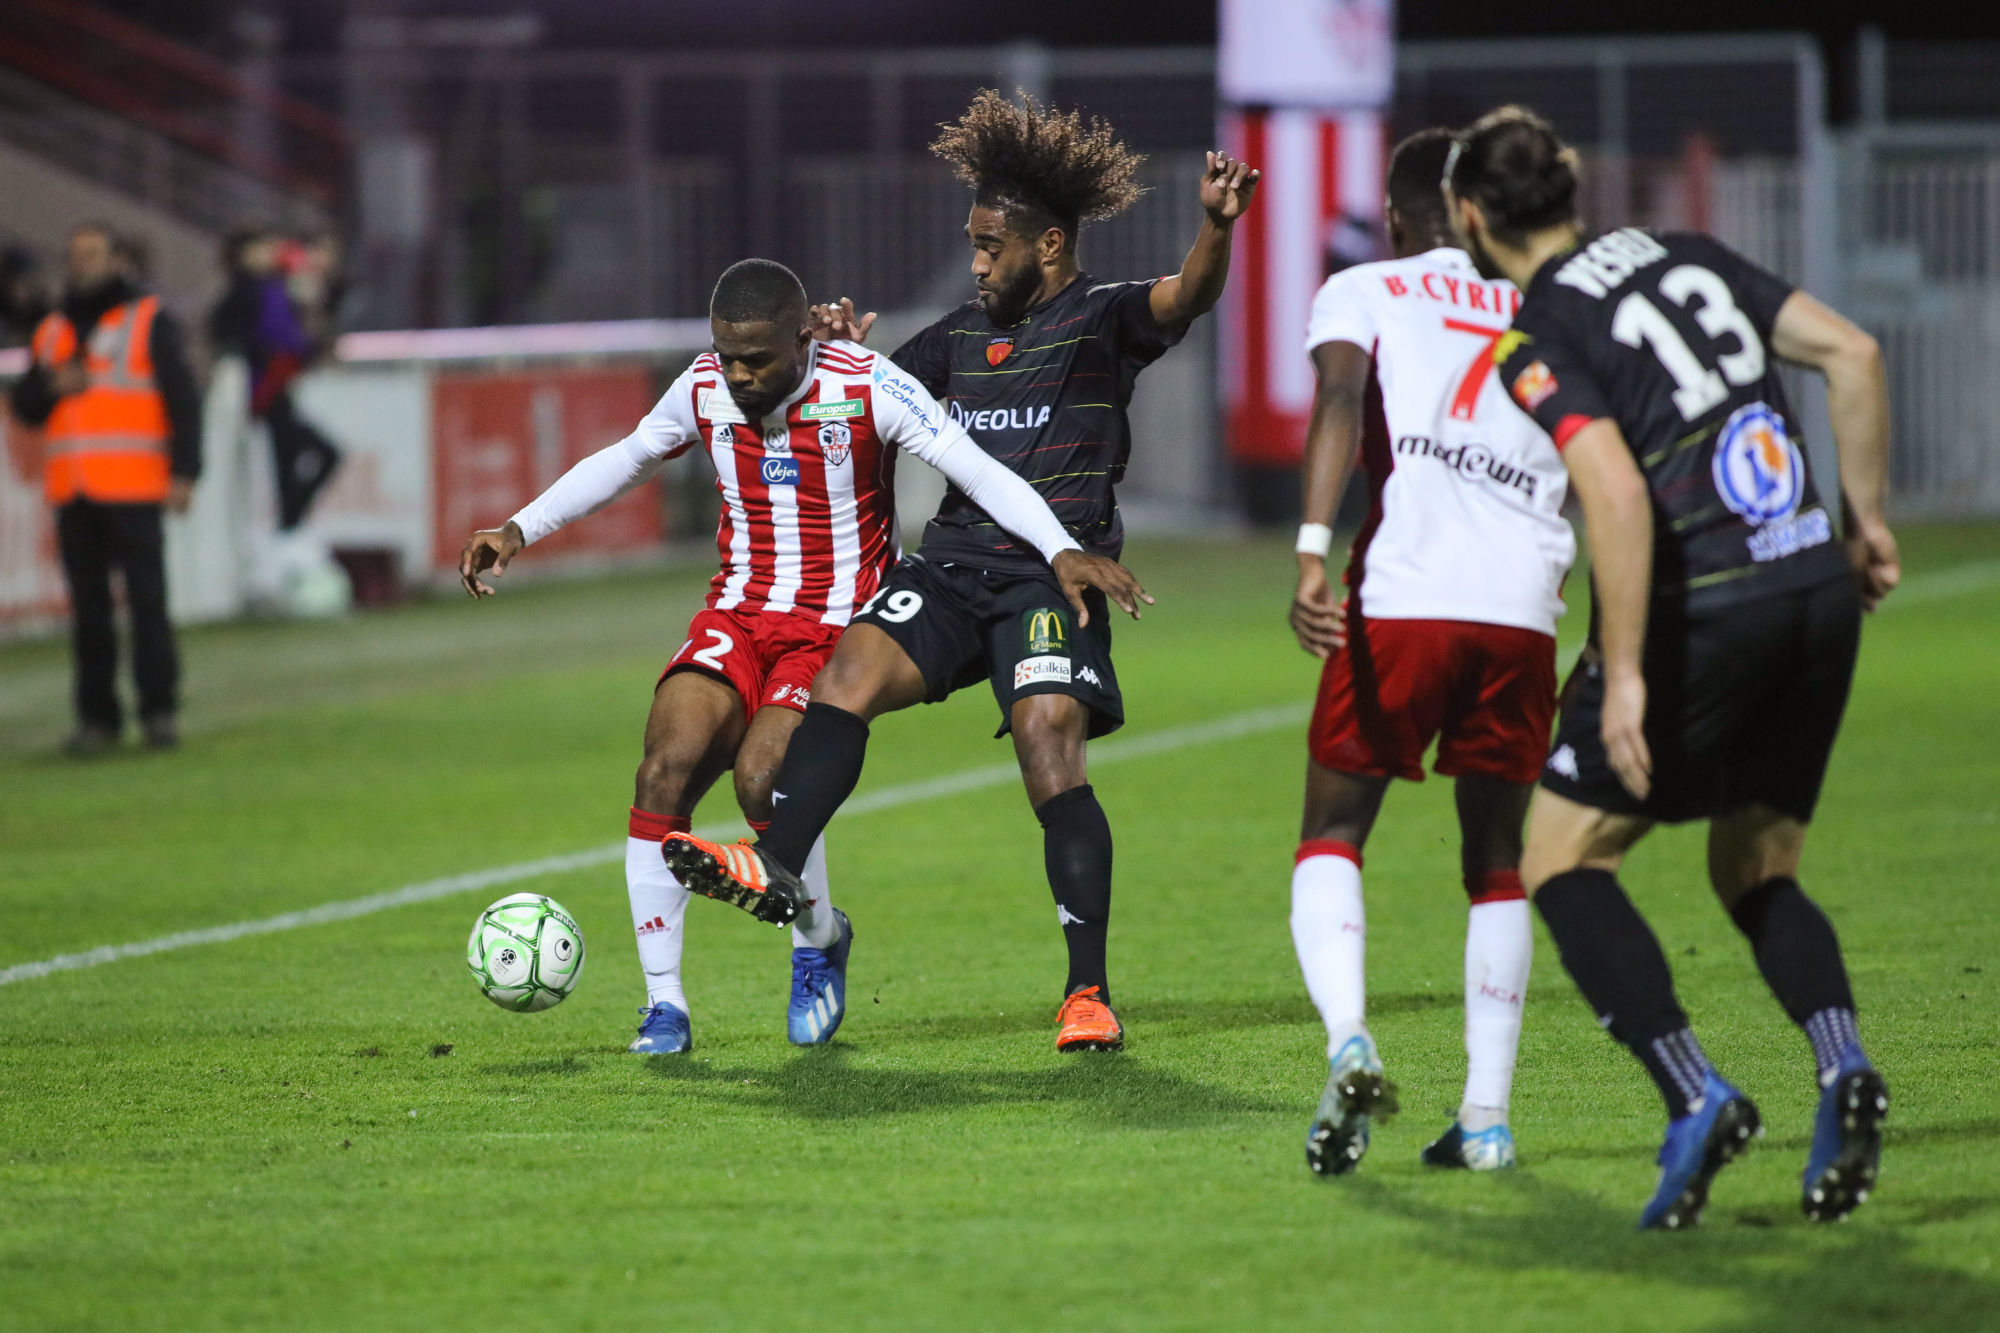 Gedeon KALULU of Ajaccio and Georges GOPE FENEPEJ of Le Mans during the Ligue 2 match between AC Ajaccio and Le Mans on February 21, 2020 in Ajaccio, France. (Photo by Michel Luccioni/Icon Sport) - Stade François-Coty - Ajaccio (France)